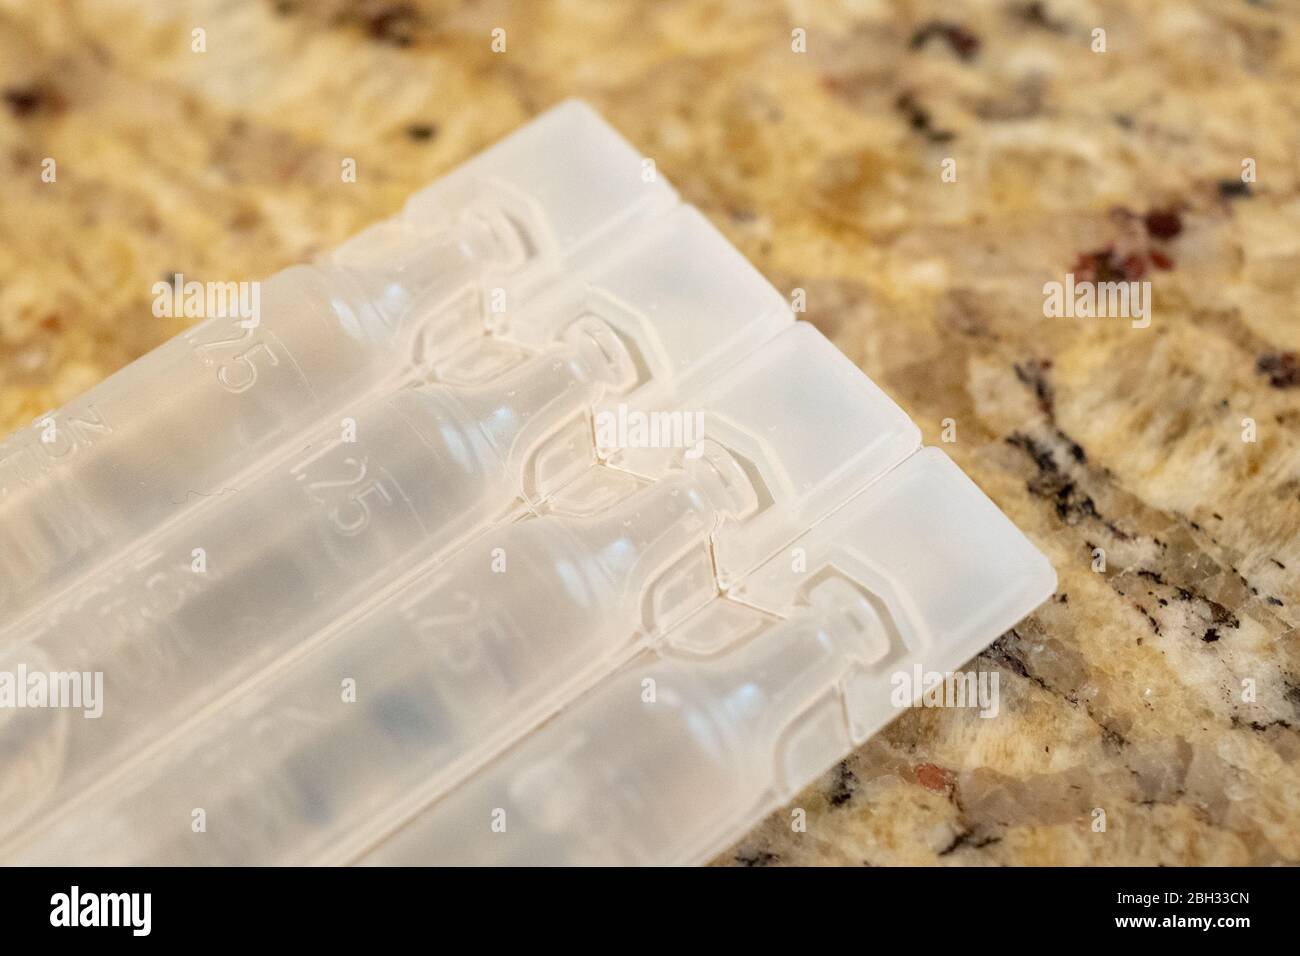 Close-up of nebulizer vials of the respiratory medication albuterol sulfate, a medication often used in the treatment of the COVID-19 coronavirus, April 11, 2020. () Stock Photo